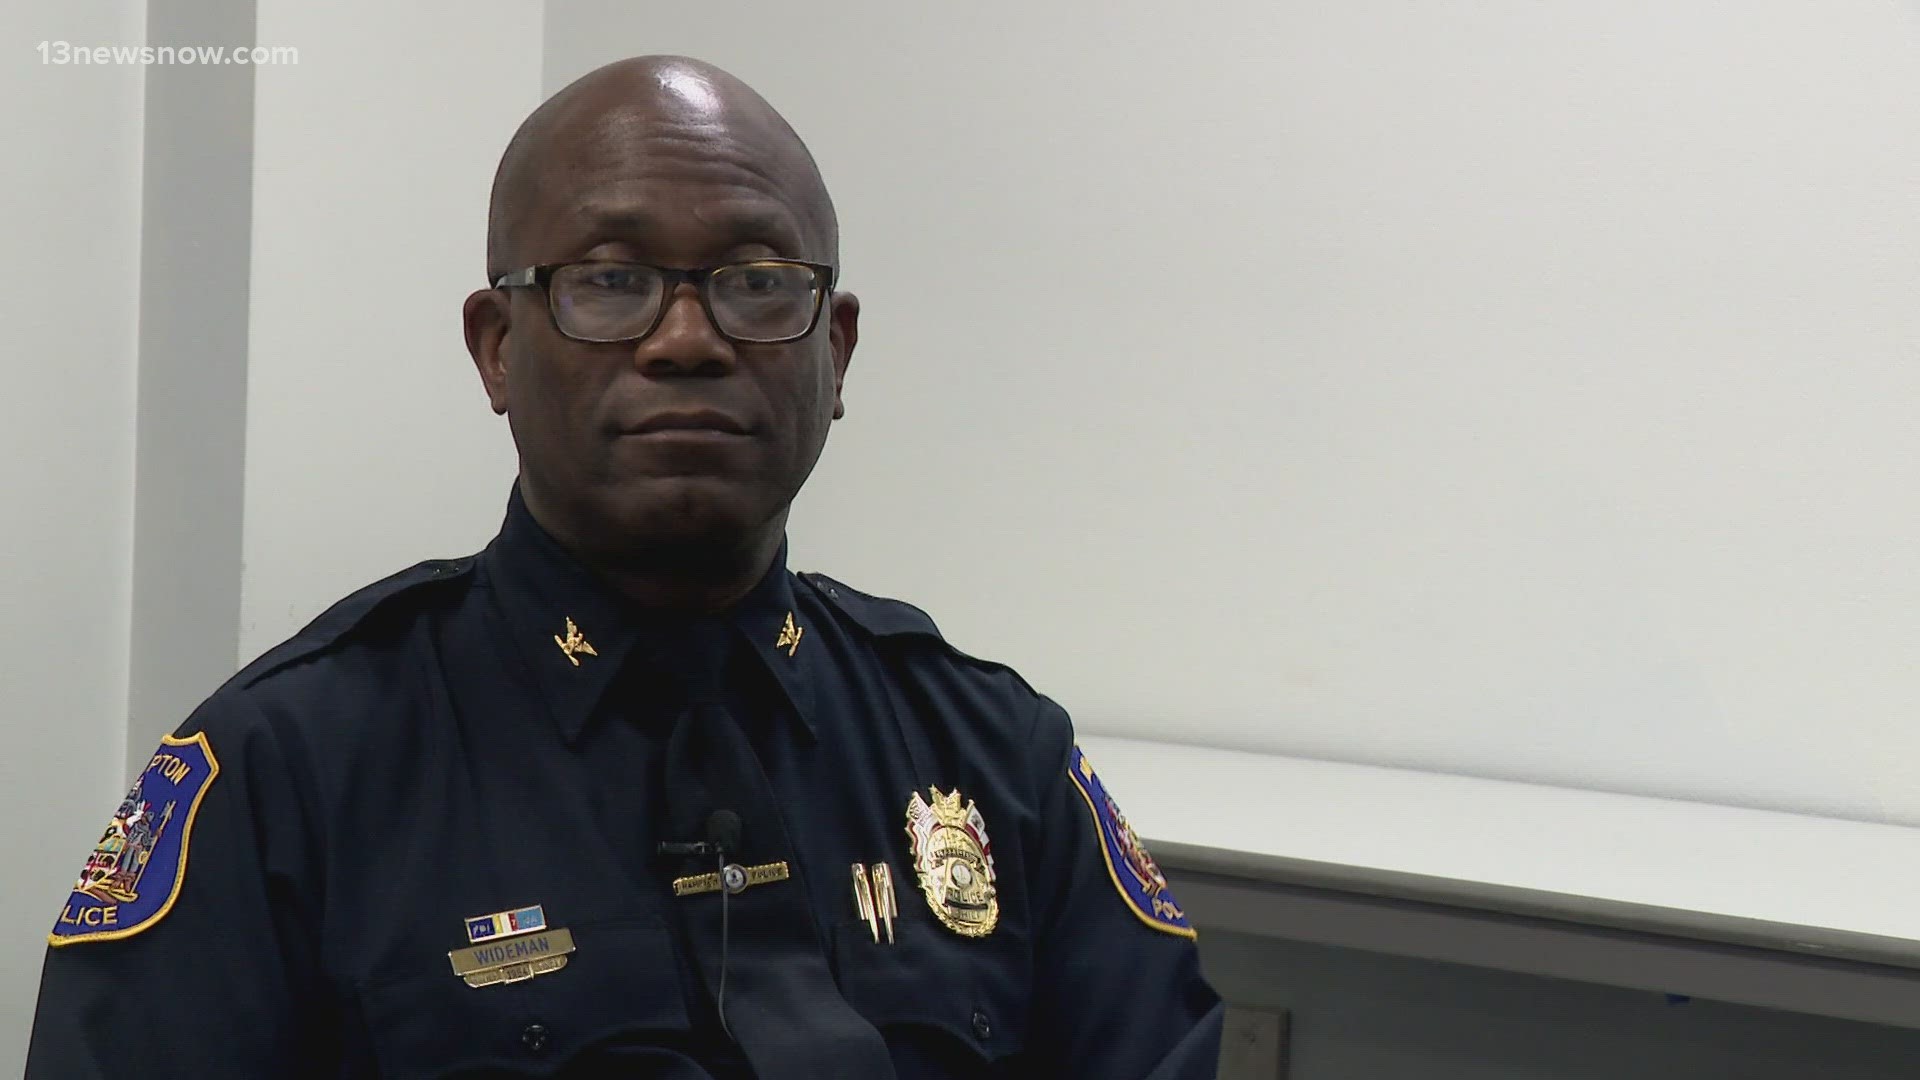 Chief Jimmie Wideman said his overall mission is public service, meaning making sure Hampton citizens feel safe in their homes, businesses and on the road.